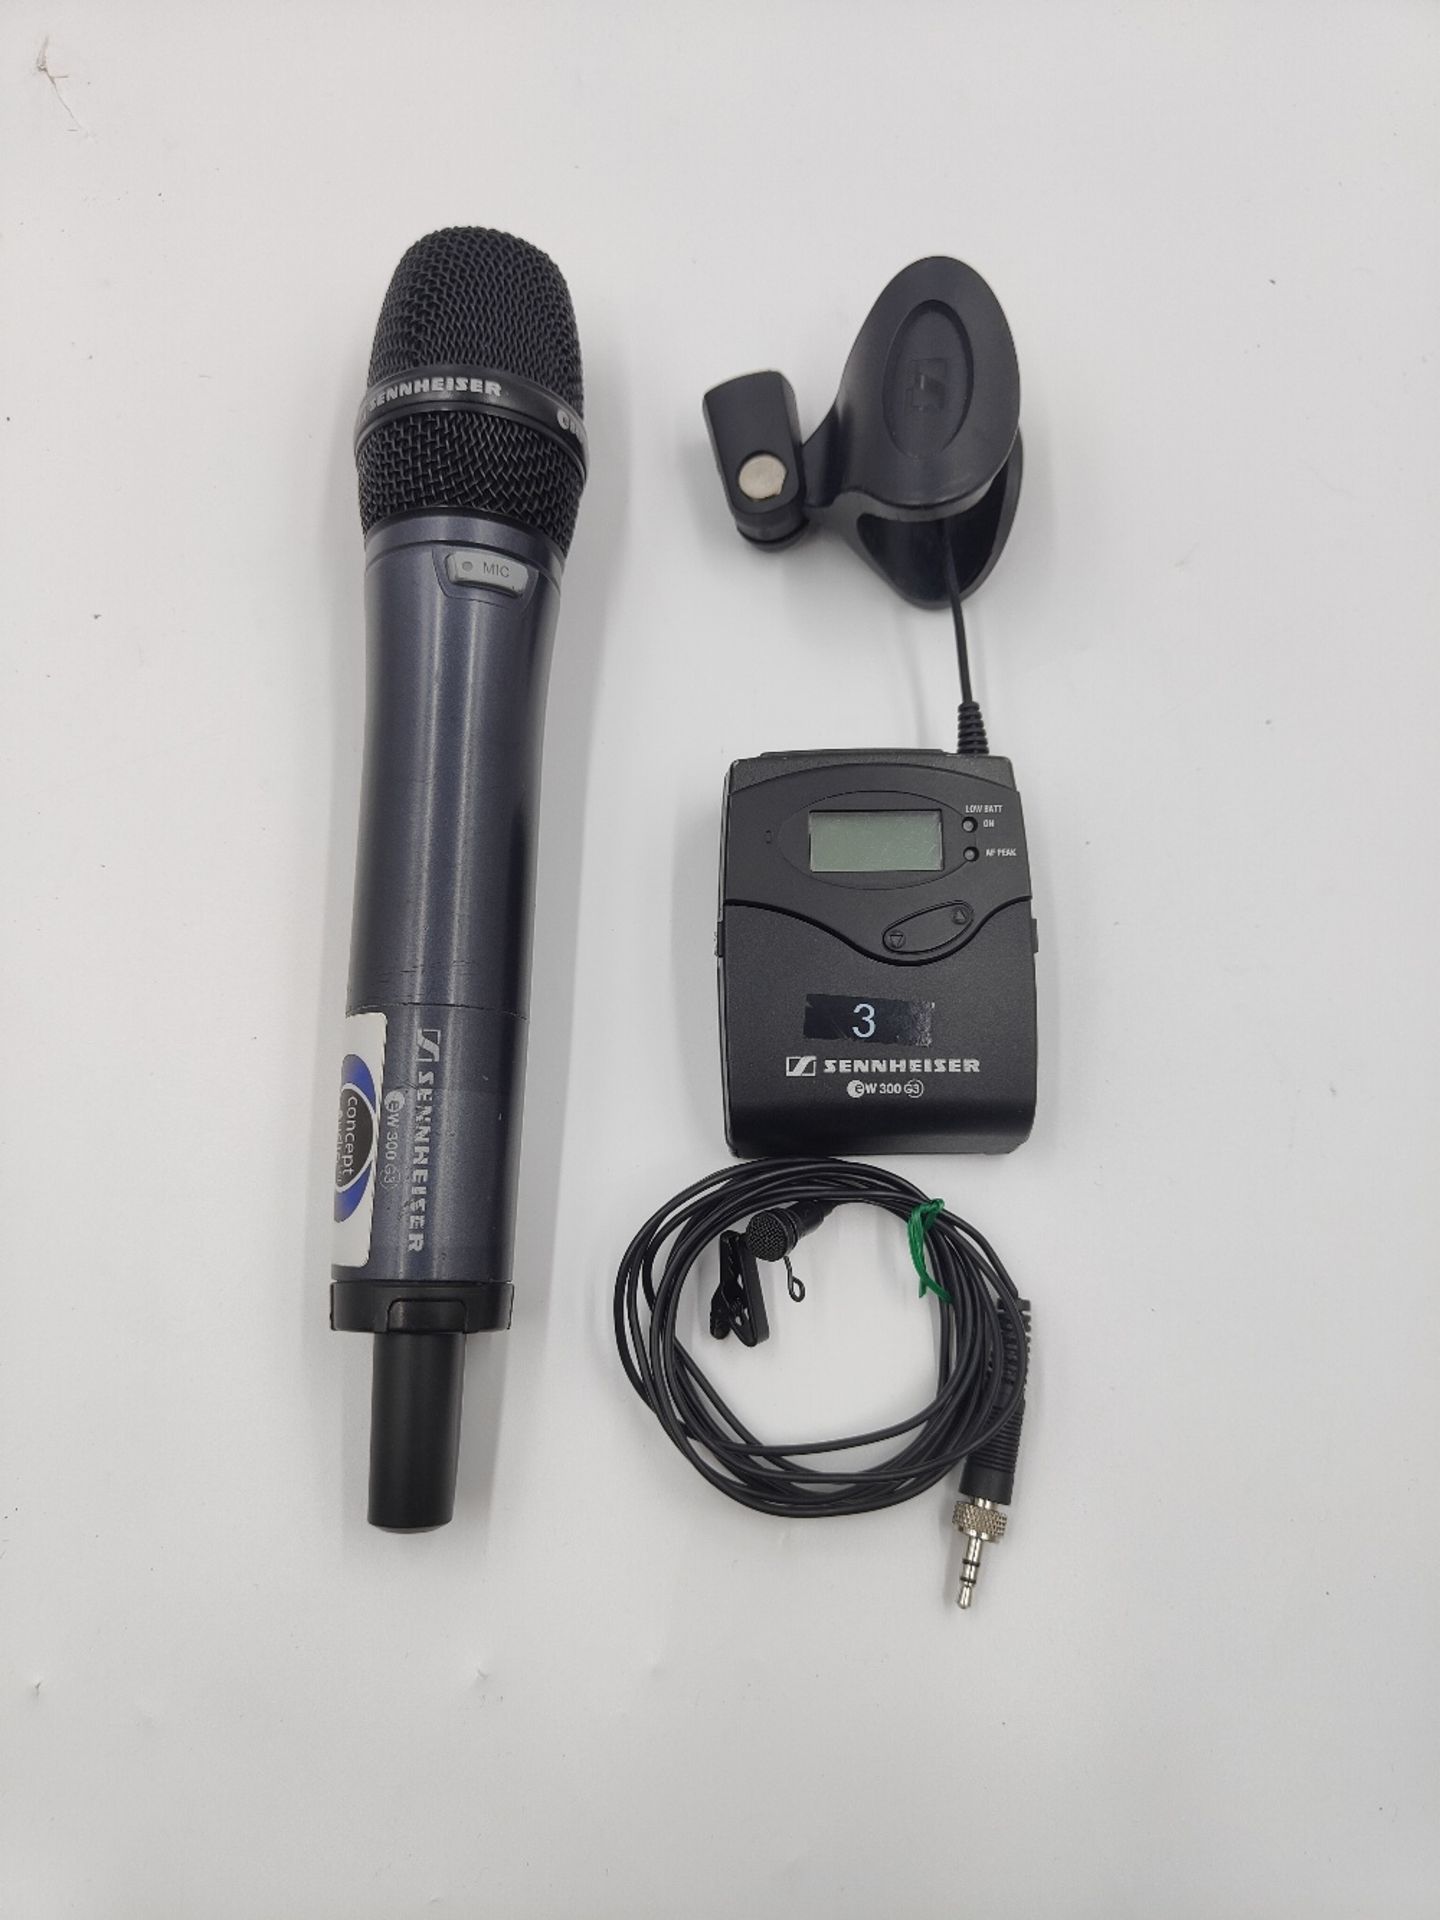 Sennheiser EW300 G3 Microphone and Receiver Kit - Image 2 of 6